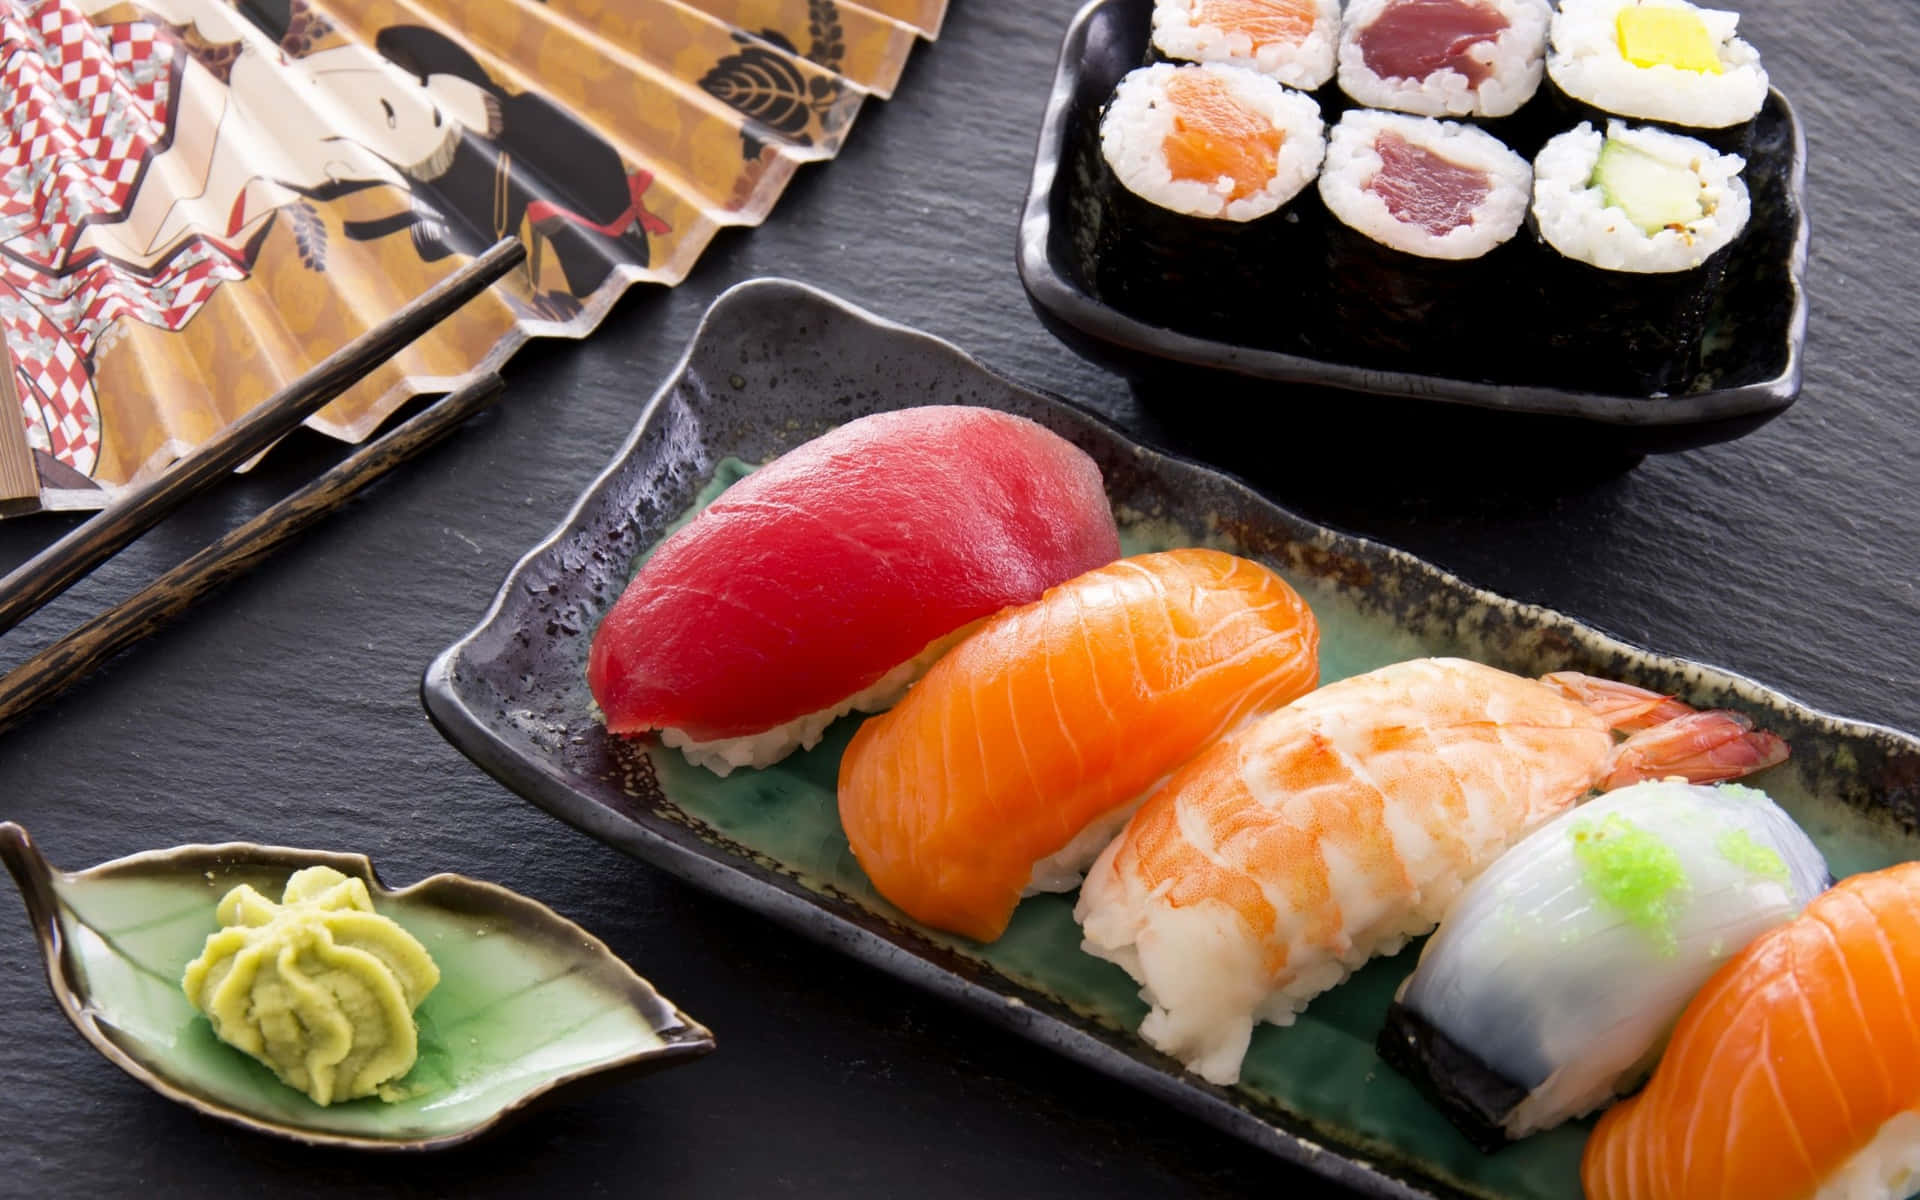 Delicious Assortment of Sushi on a Wooden Platter